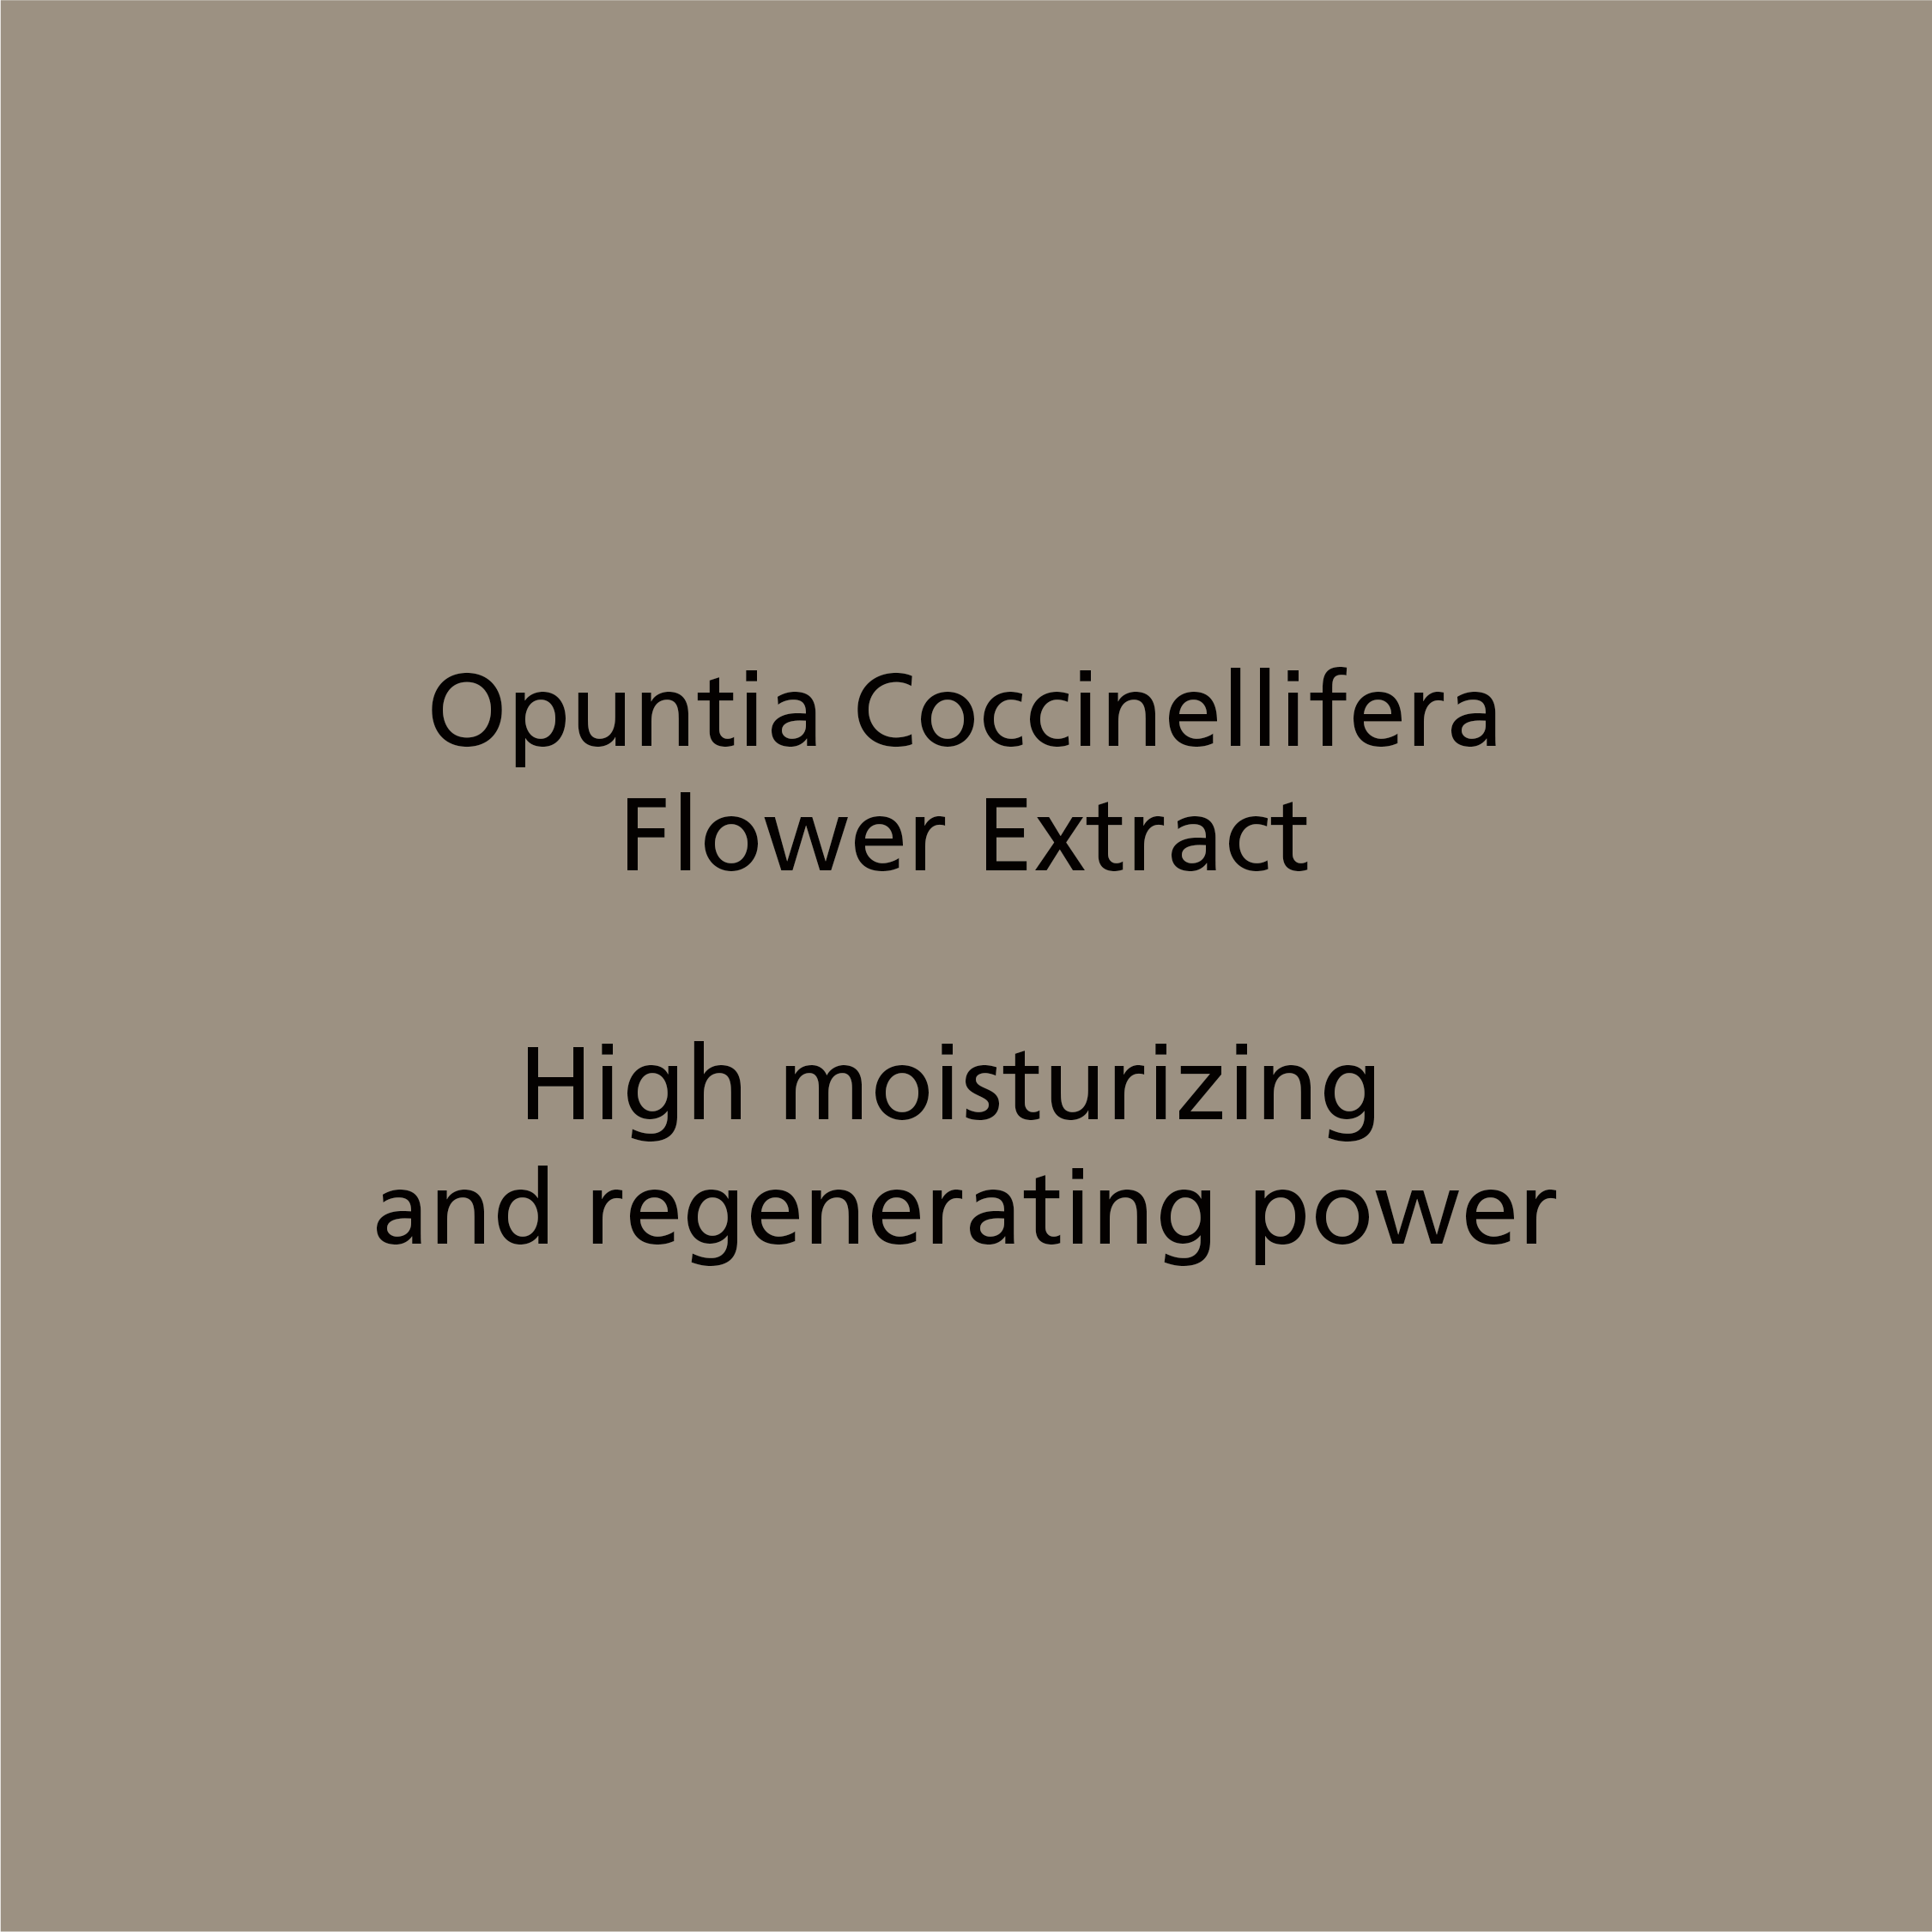 Opuntia Coccinellifera Flower Extract